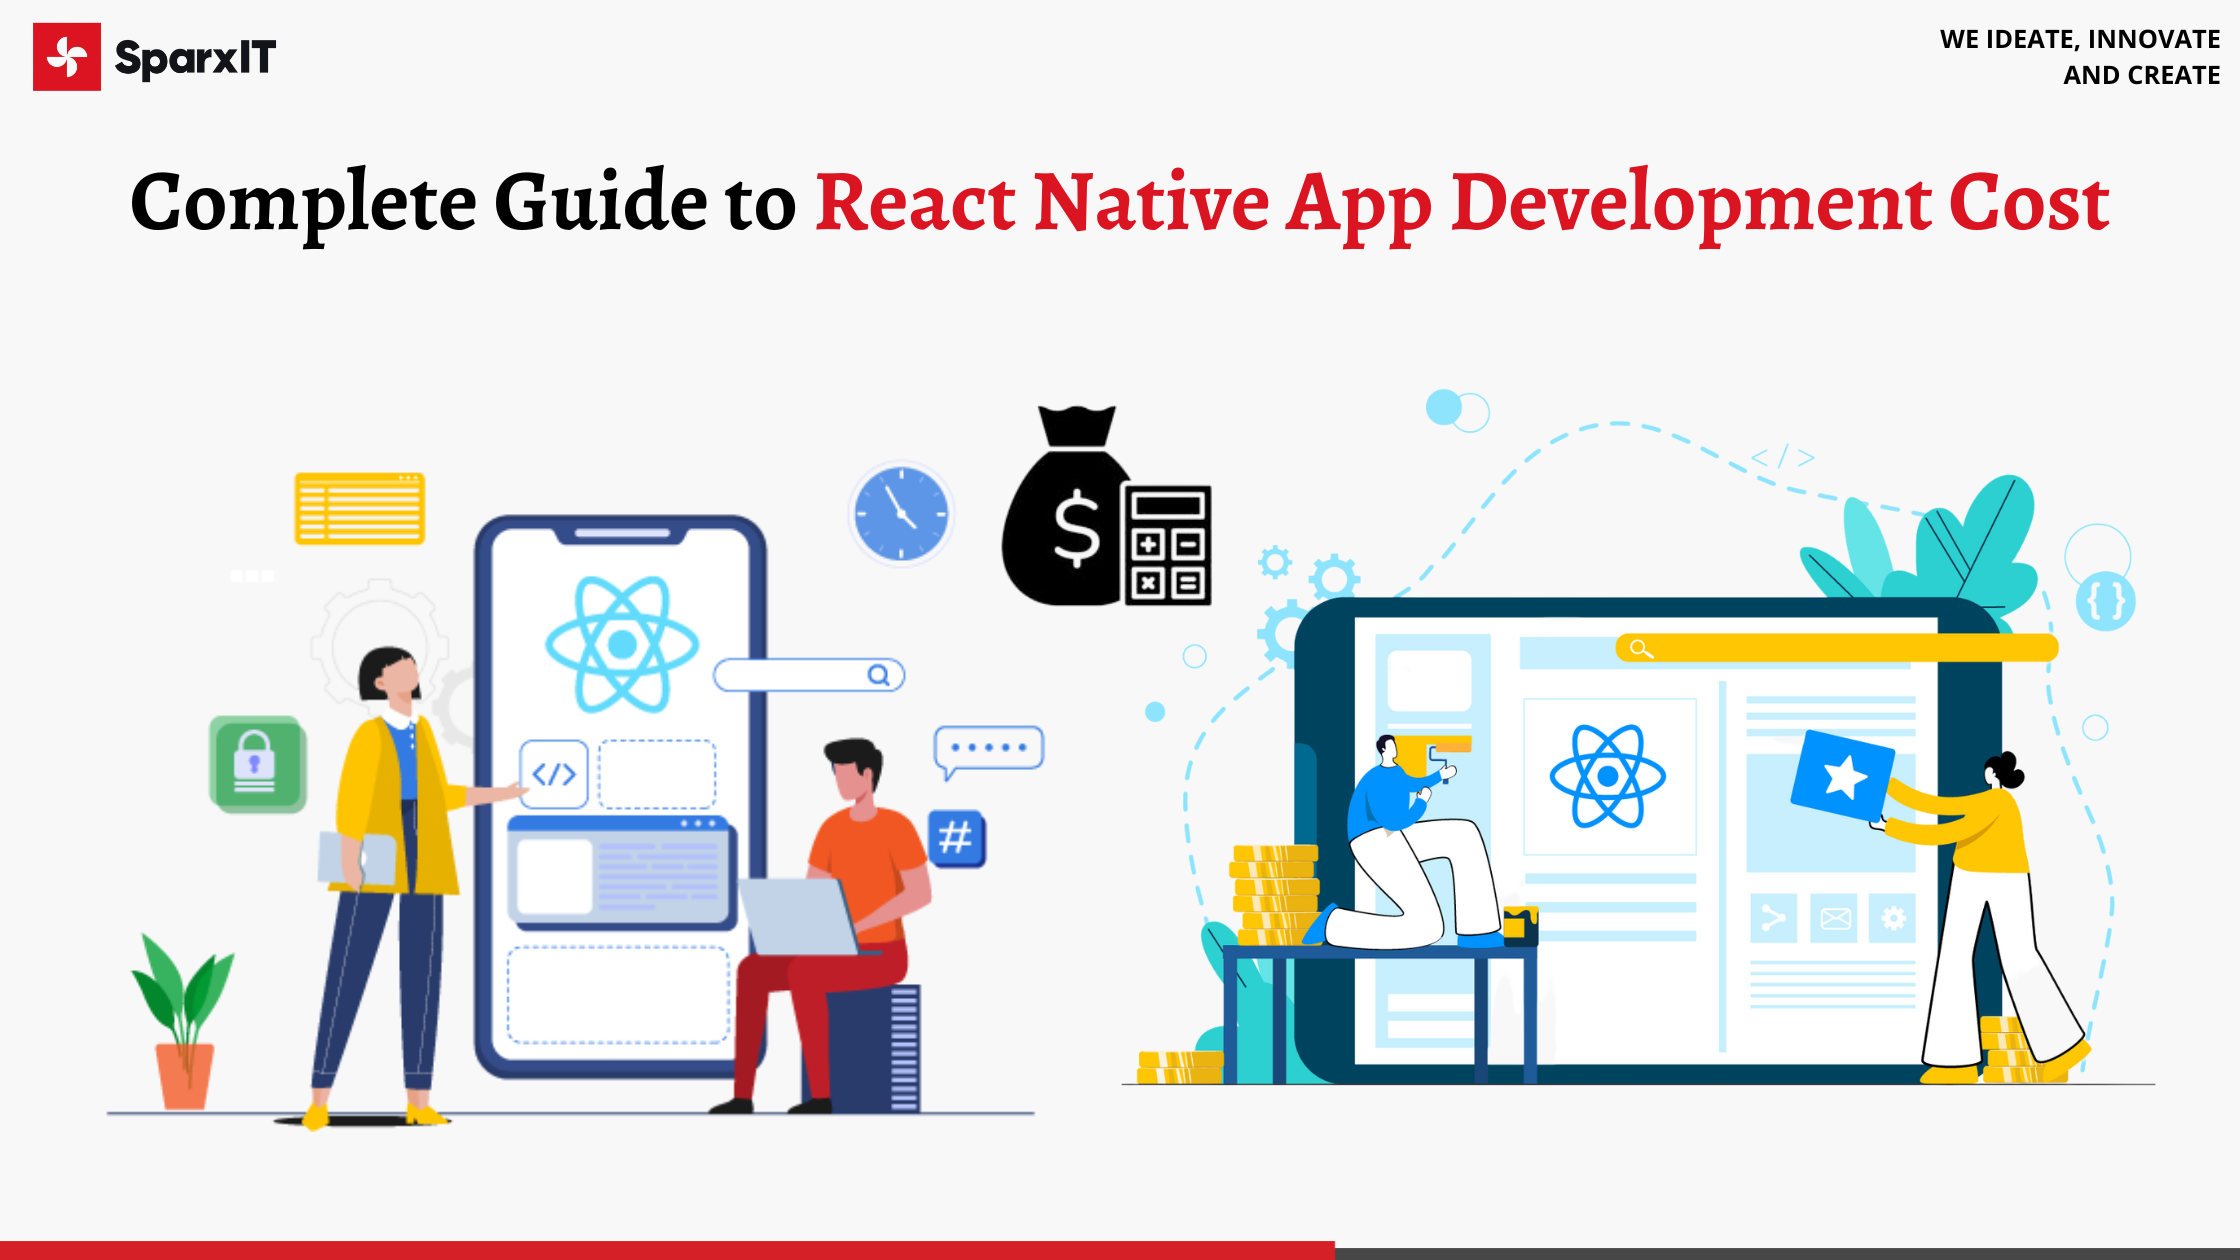 Complete Guide to React Native App Development Cost